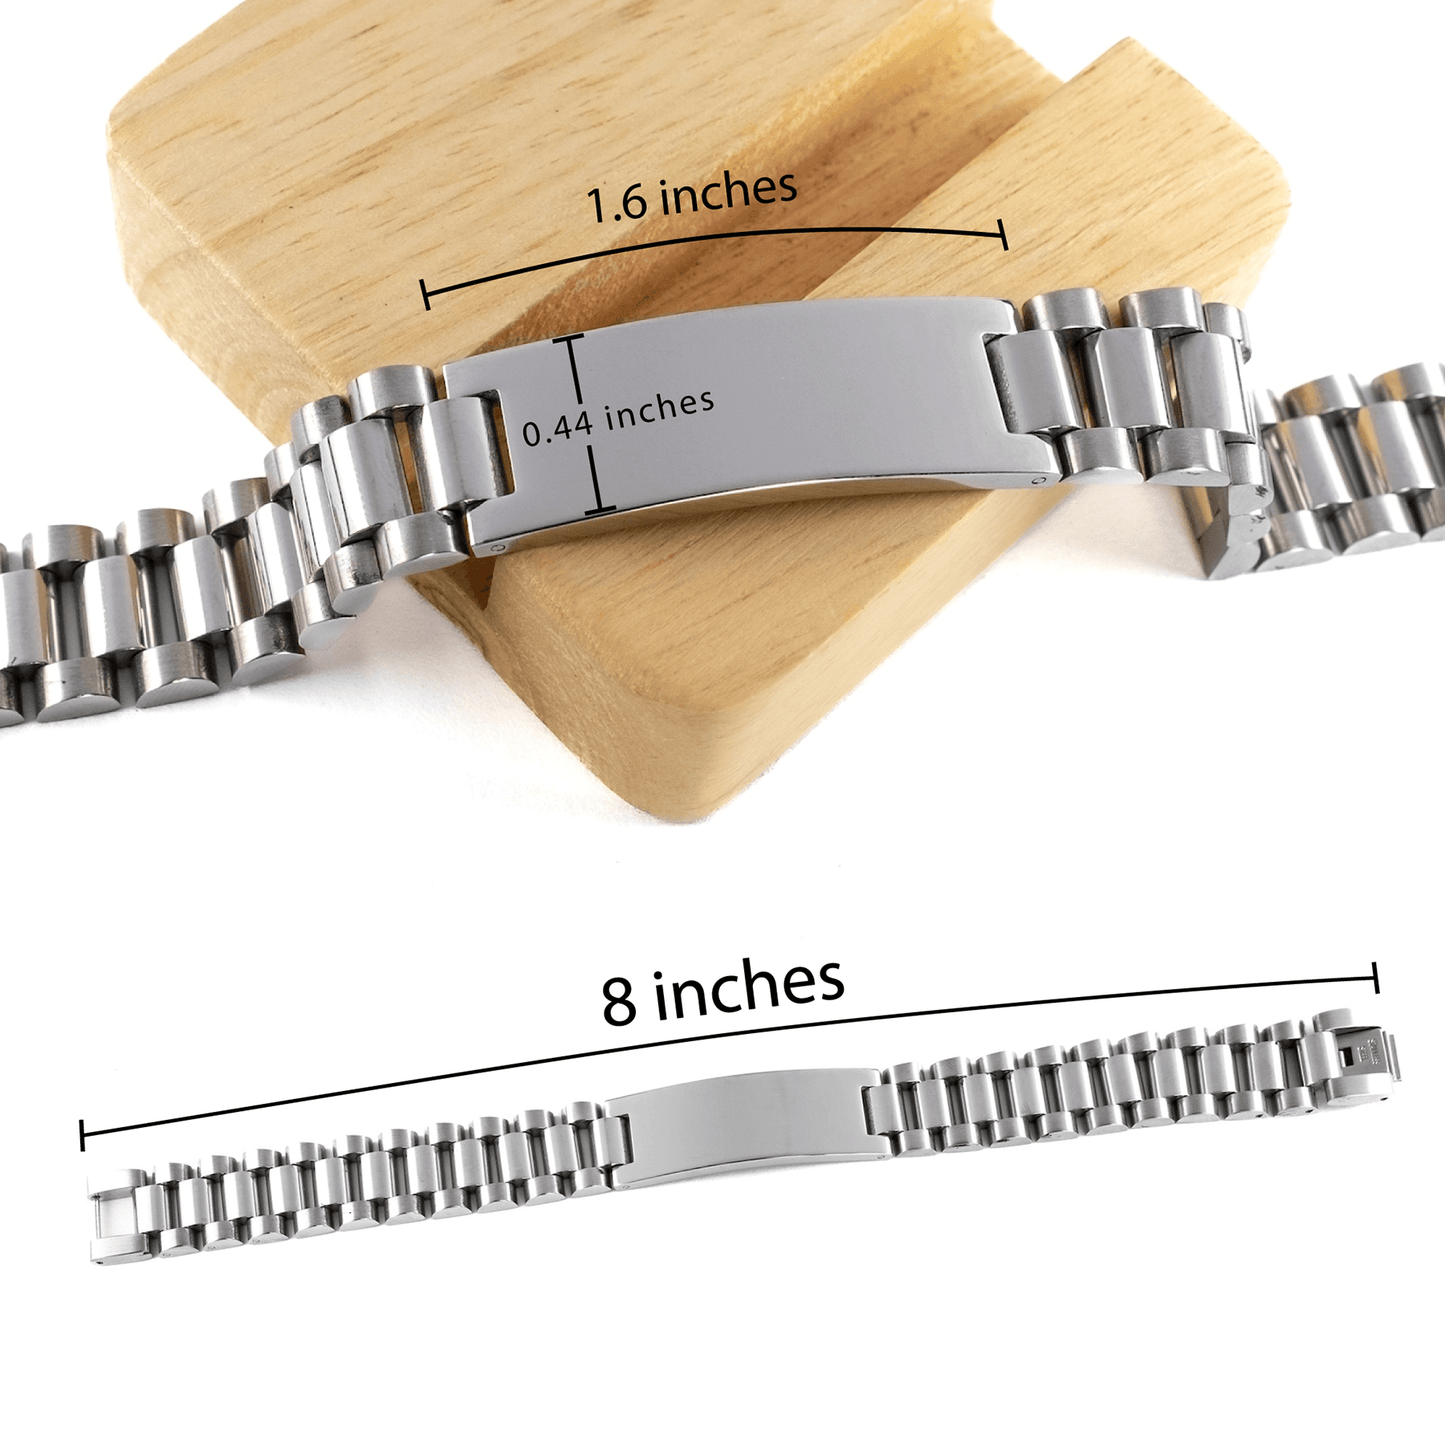 Remarkable Law Enforcement Officer Gifts, Your dedication and hard work, Inspirational Birthday Christmas Unique Ladder Stainless Steel Bracelet For Law Enforcement Officer, Coworkers, Men, Women, Friends - Mallard Moon Gift Shop